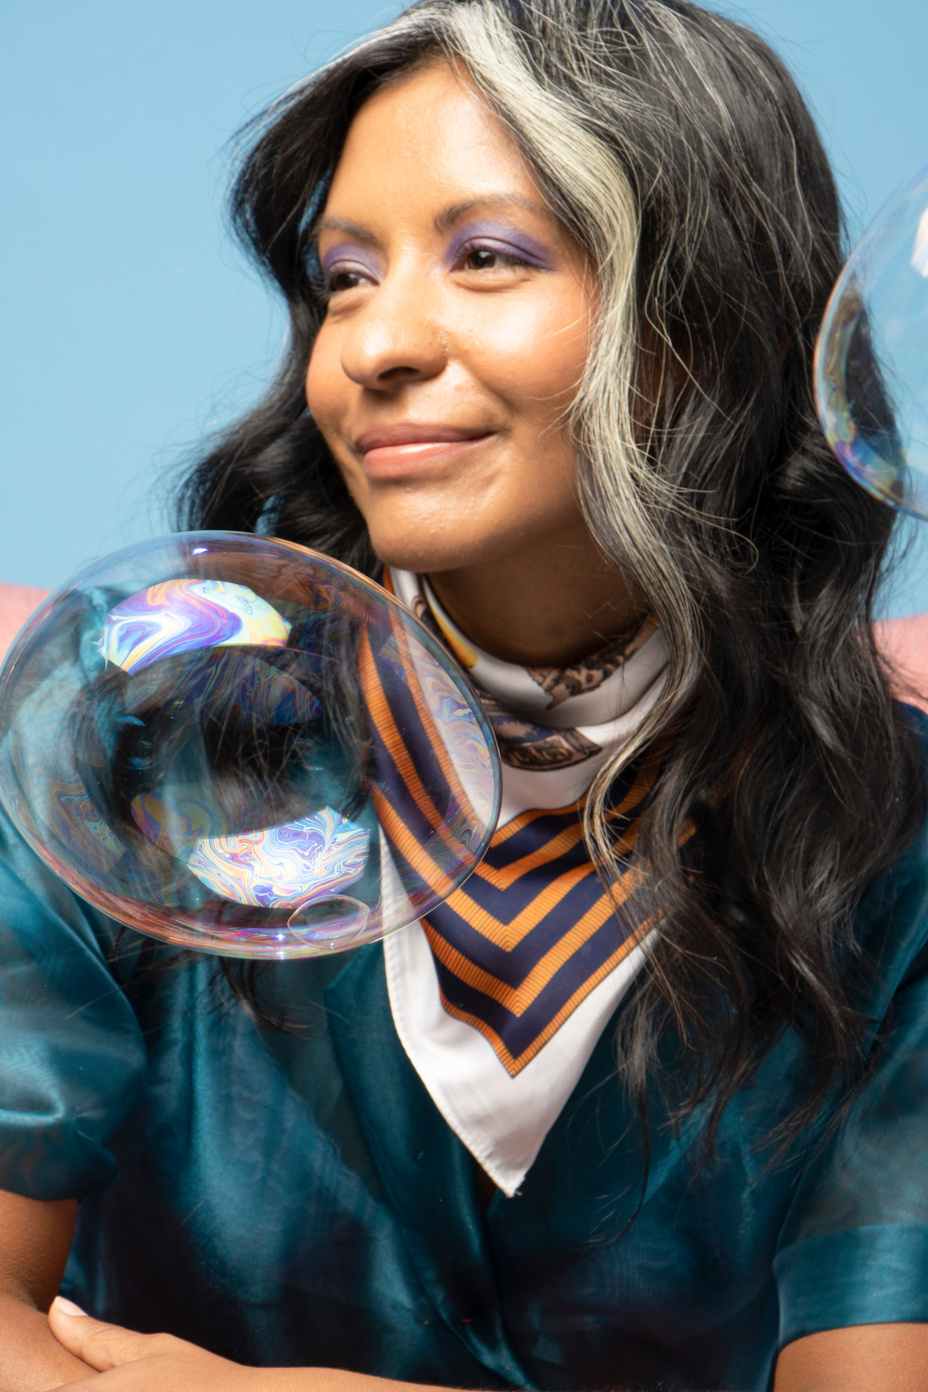 Portrait of a Smiling Woman with Bubbles